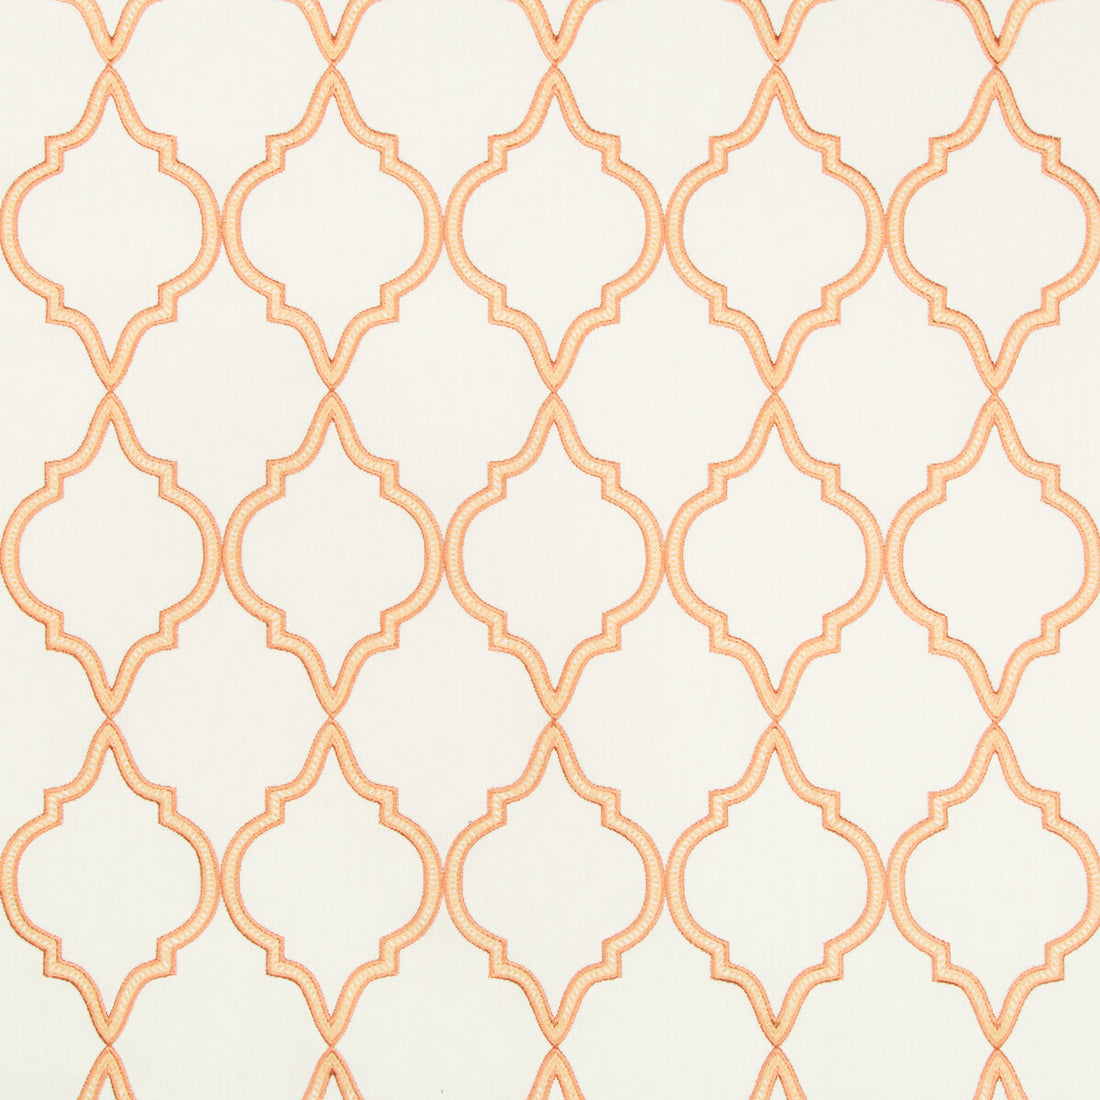 Highhope fabric in terracotta color - pattern 35301.12.0 - by Kravet Basics in the Greenwich collection